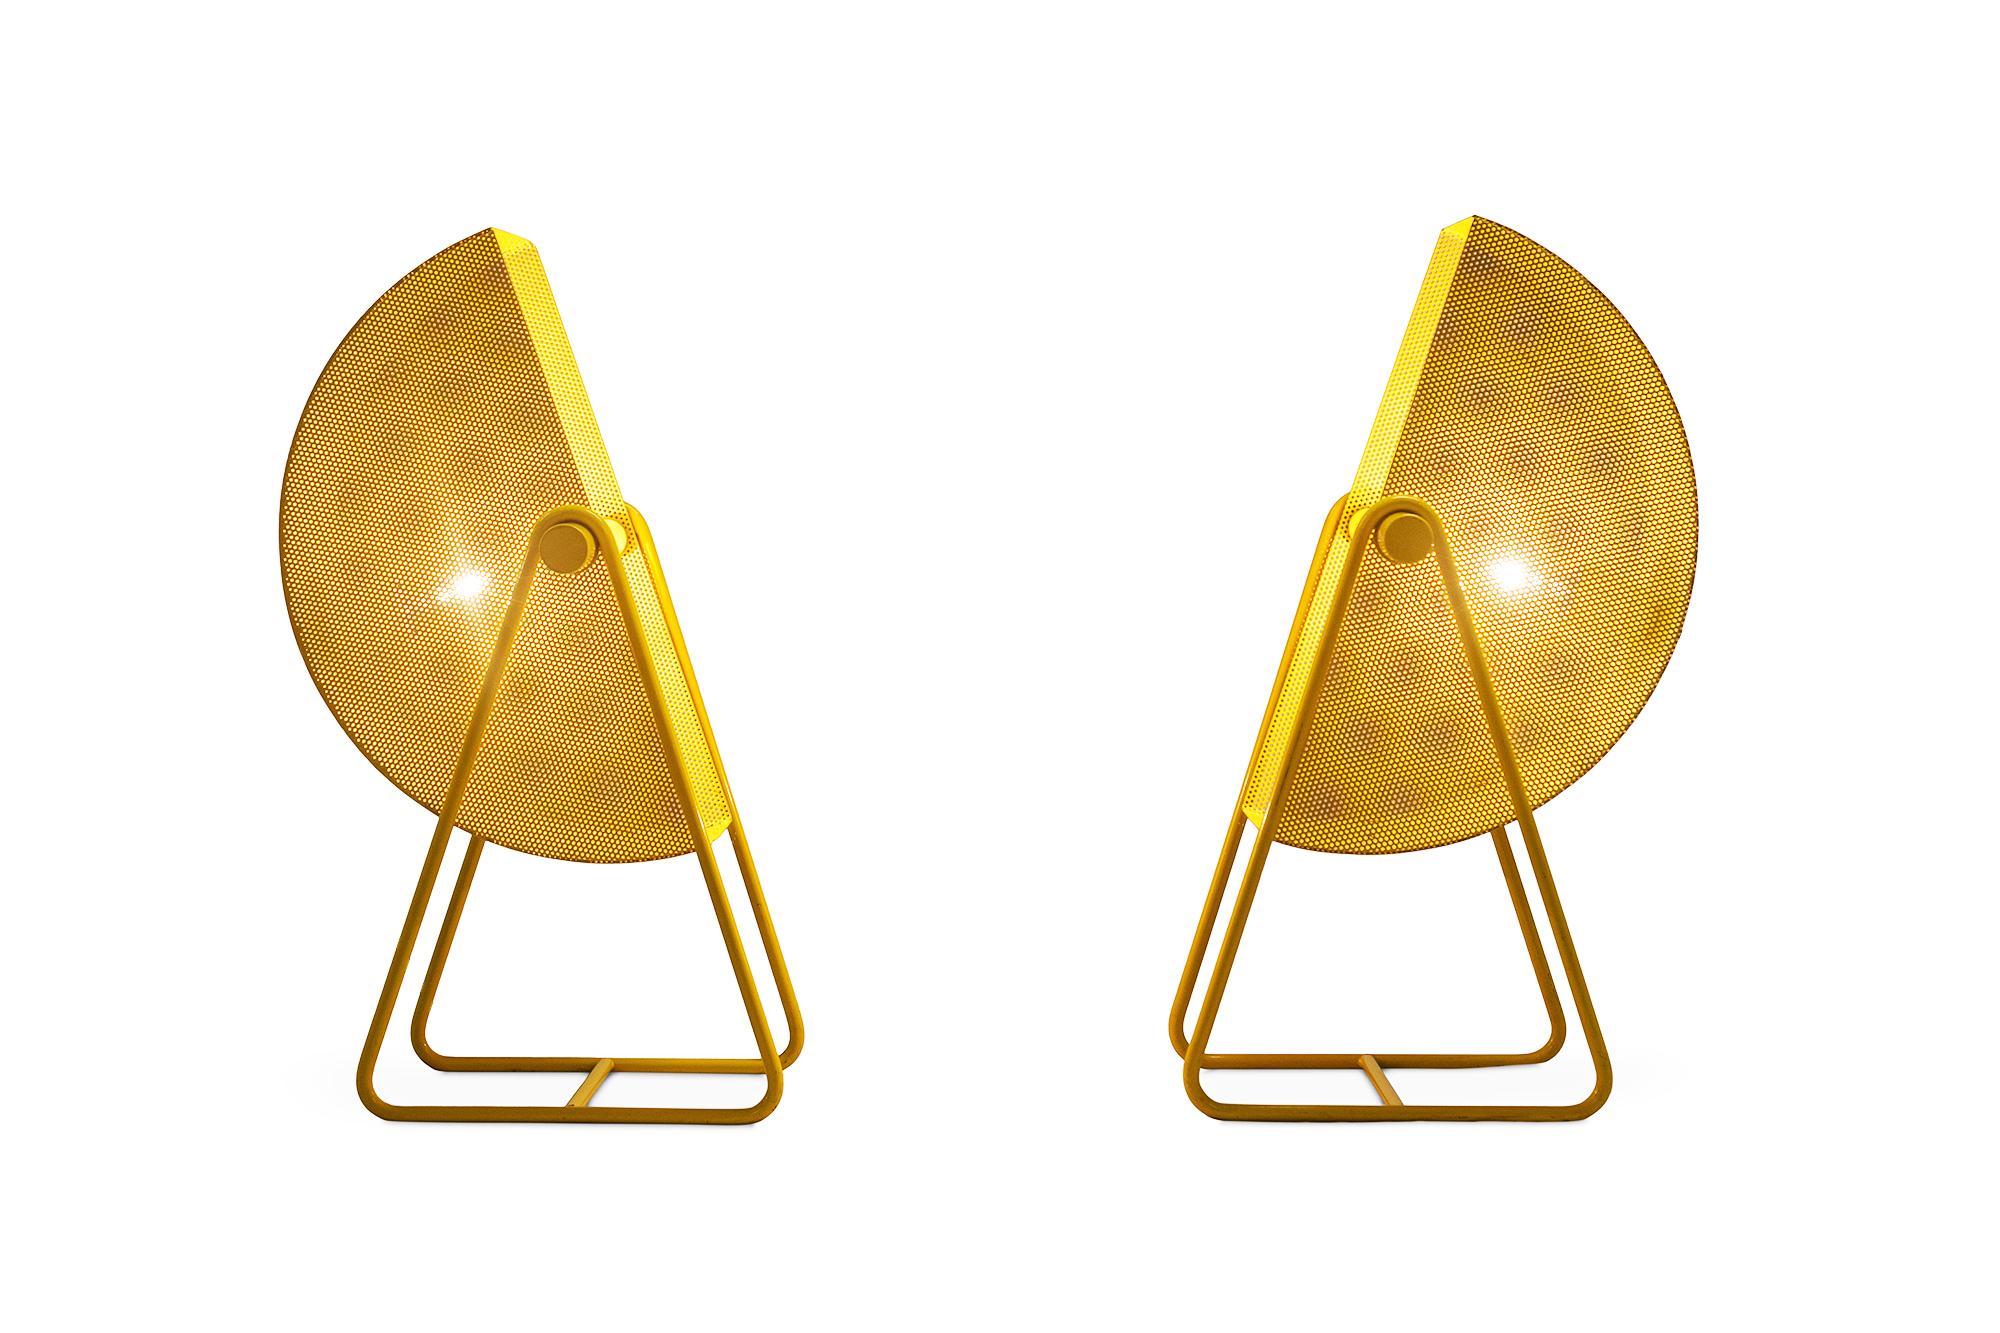 Adjustable table lights in yellow coated metal. The shades are perforated and create a nice light partition. The lamps have a very modern appearance due the sharp lines and geometrical shapes.

Measures: W 25, D 25, 40 H, 55 - 59 cm.